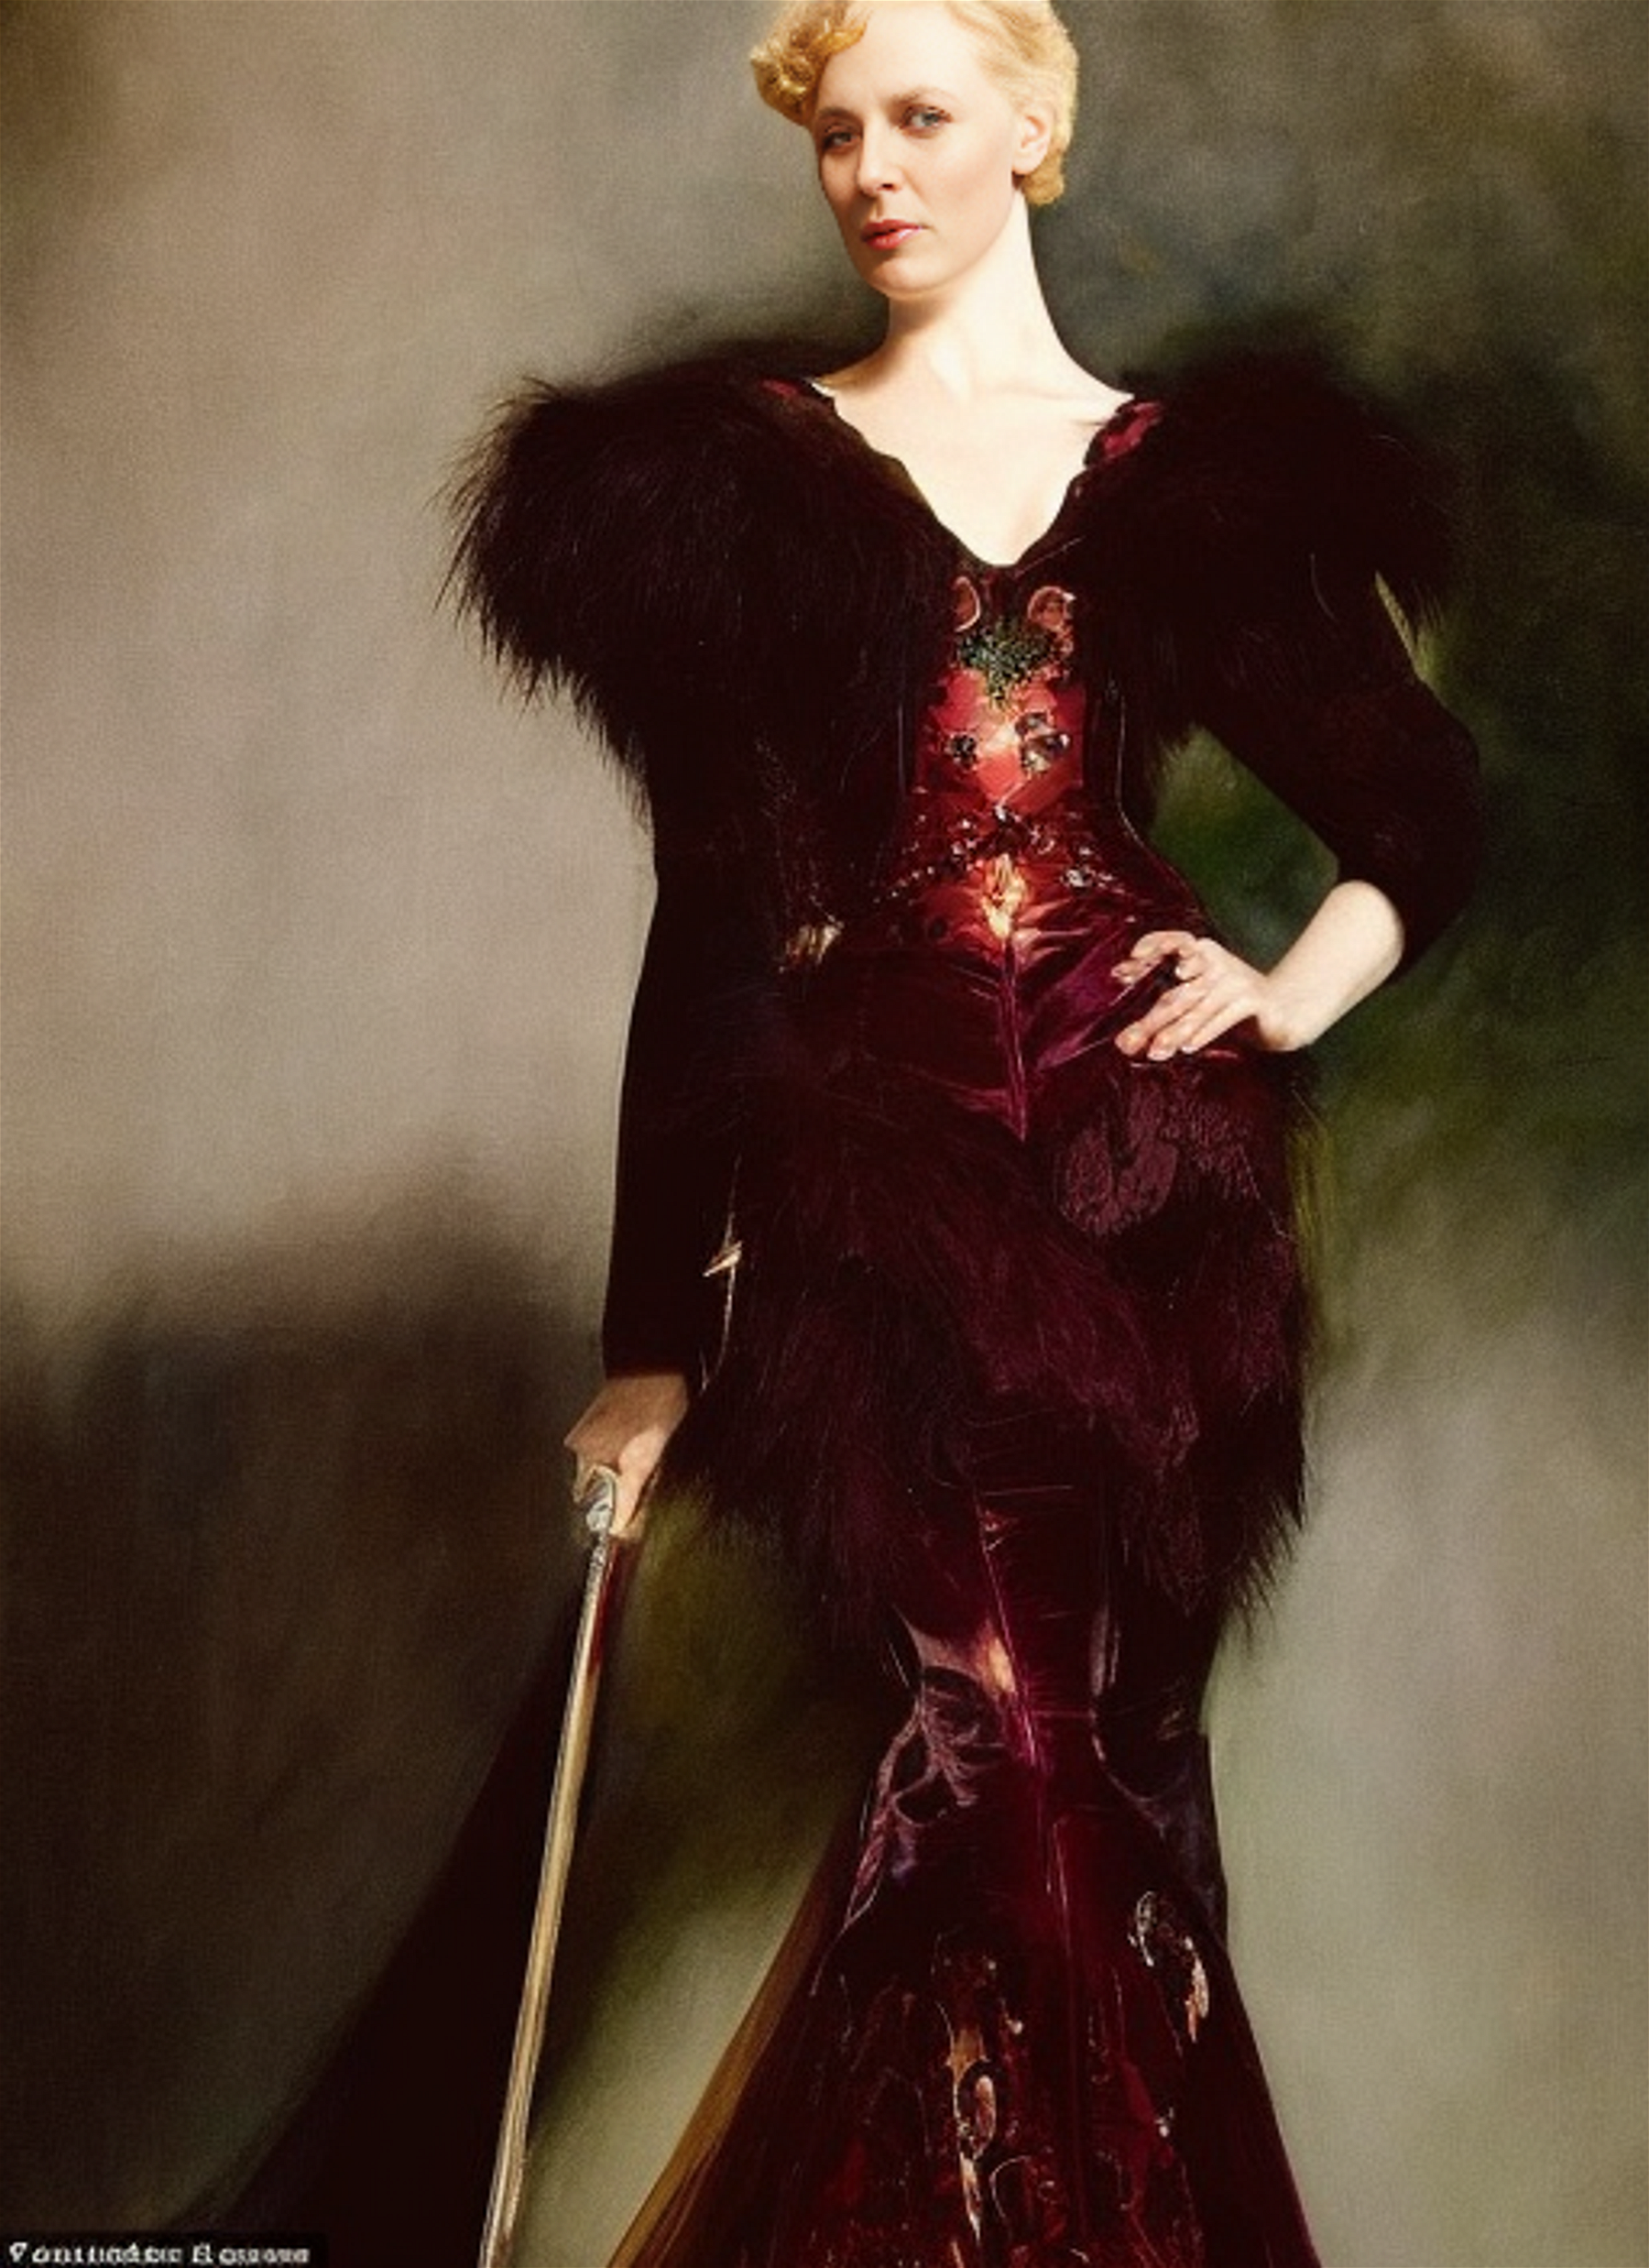 A full body portrait of Gwendoline Christie in a dramatic and intense pose, inspired by the work of John Singer Sargent and John Singer Sargent, with rich colors and dynamic lighting, in a historical and romantic setting